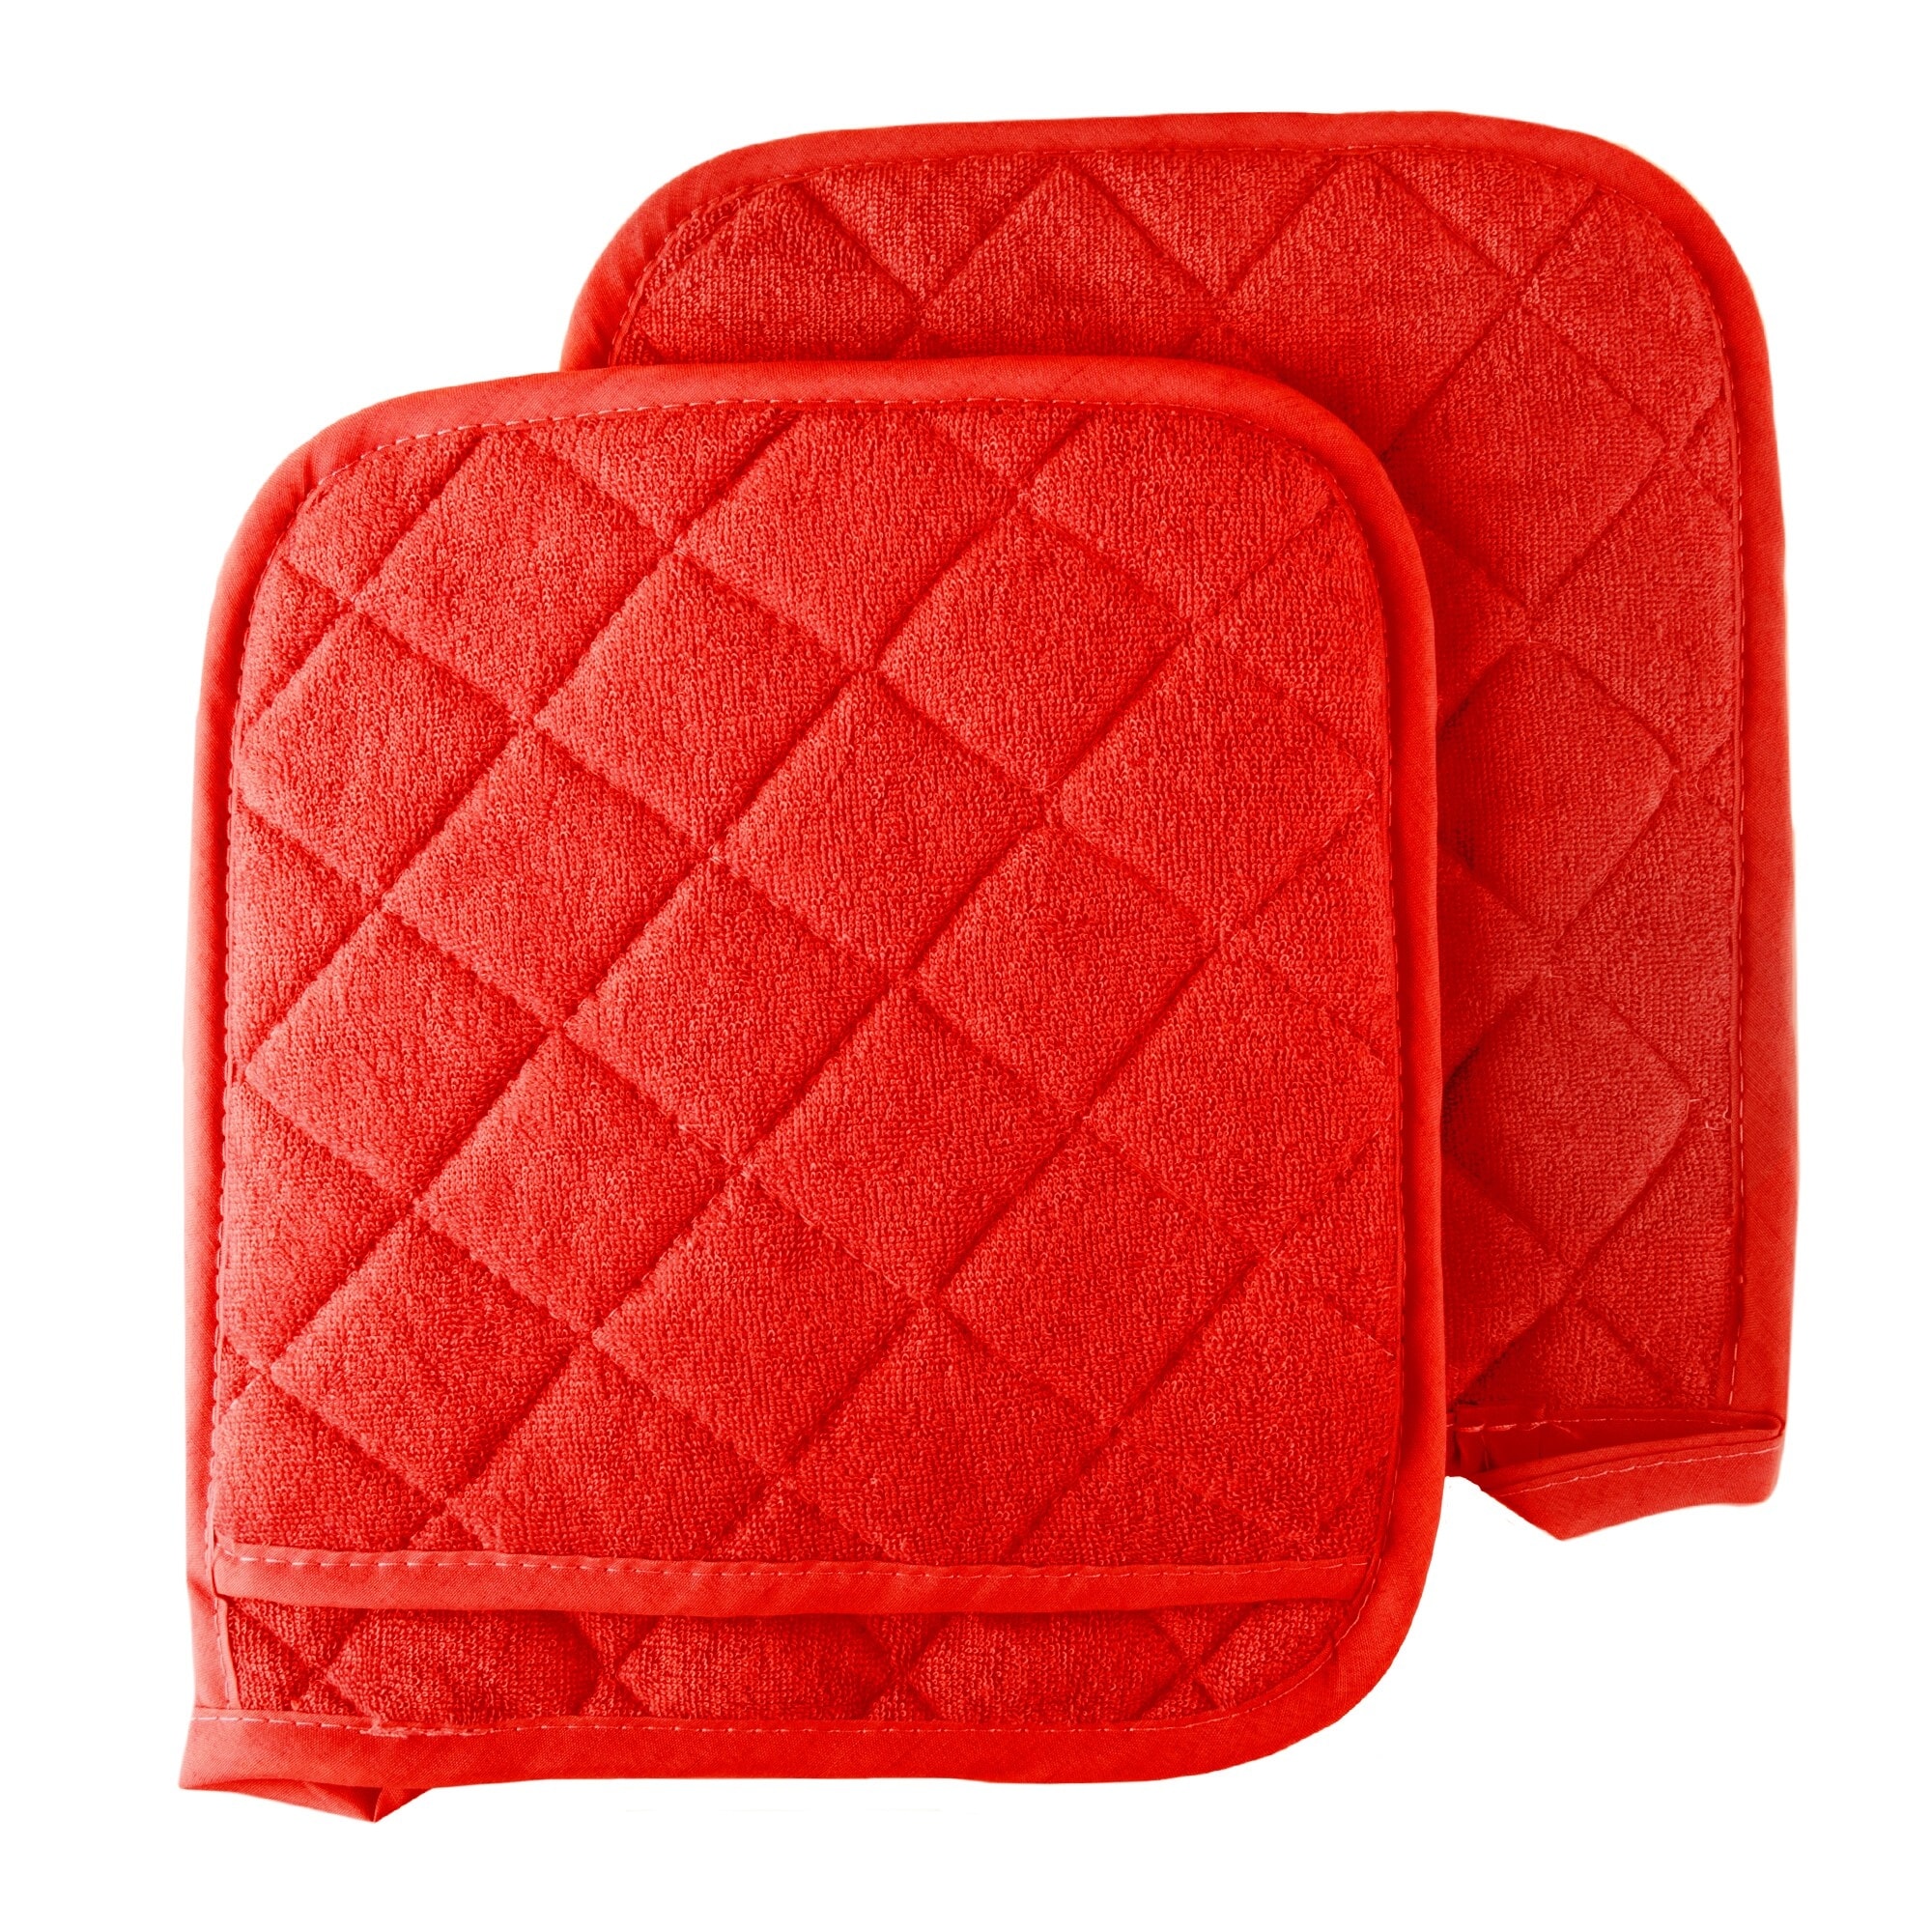 Lavish Home Quilted Cotton Burgundy Heat/Flame Resistant Oversized